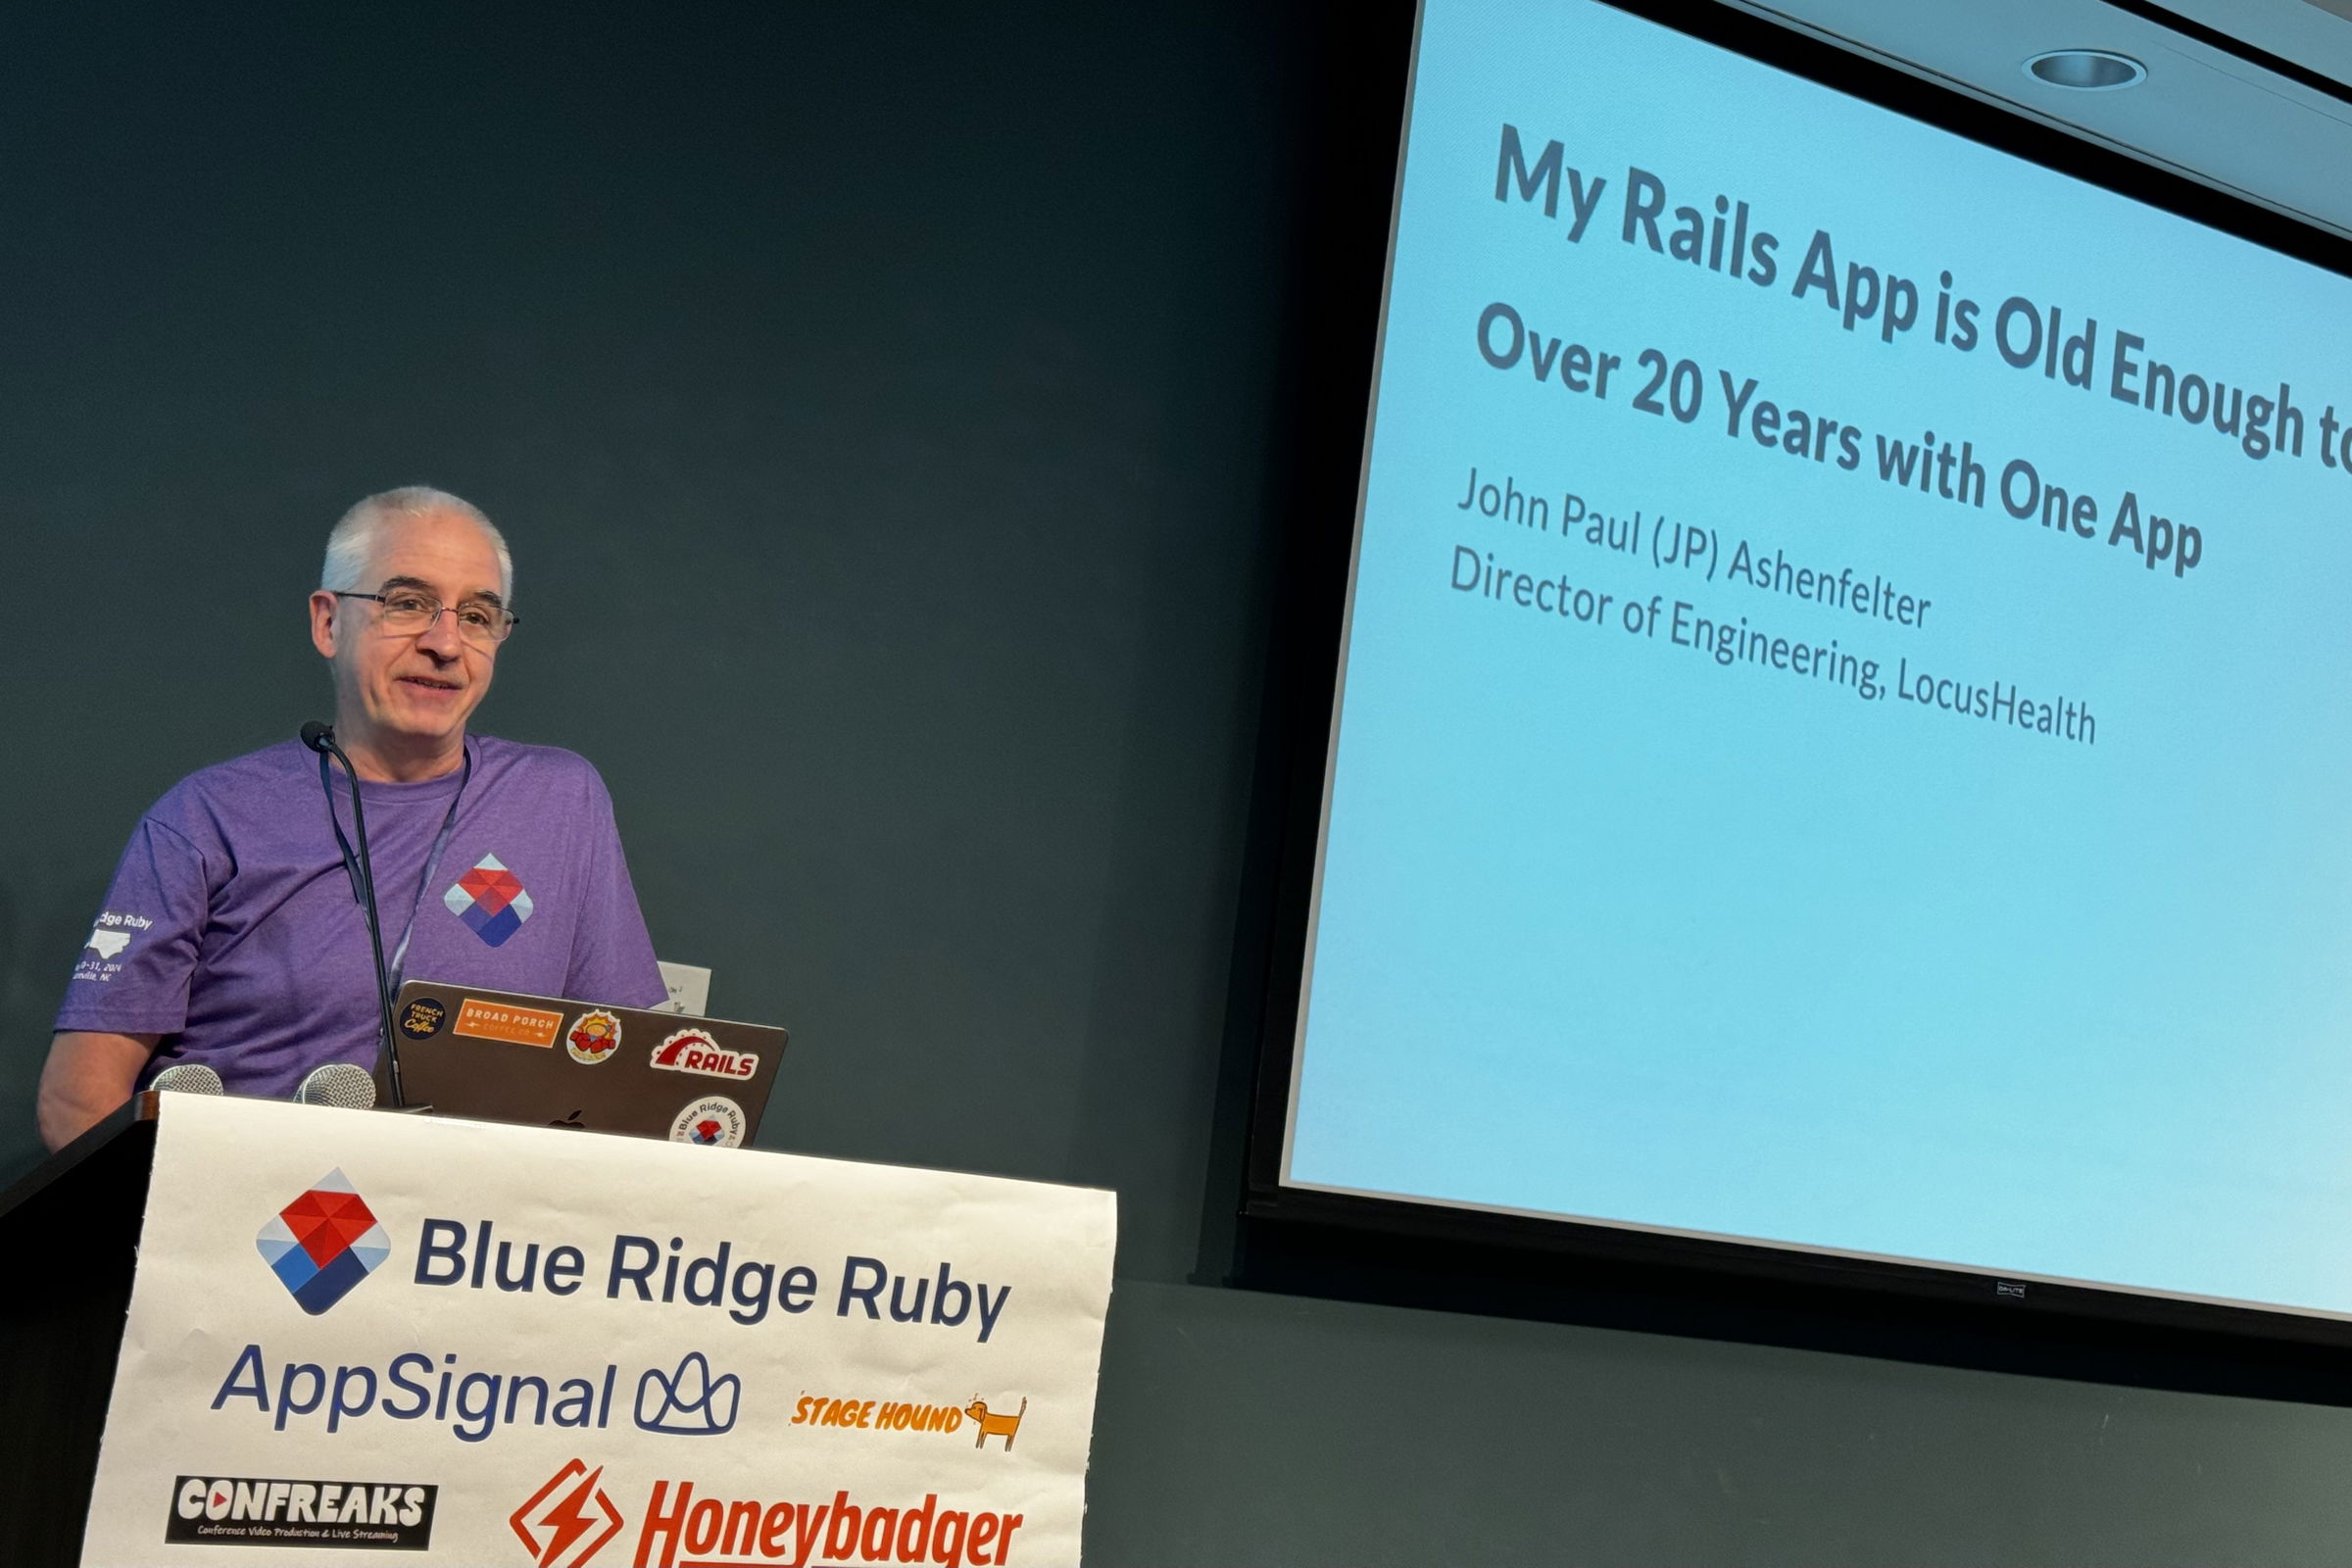 John Paul Ashenfelter at Blue Ridge Ruby conference discussing his long-term experience with a Rails application, titled “My Rails App is Old Enough to Drink: Over 20 Years with One App.”